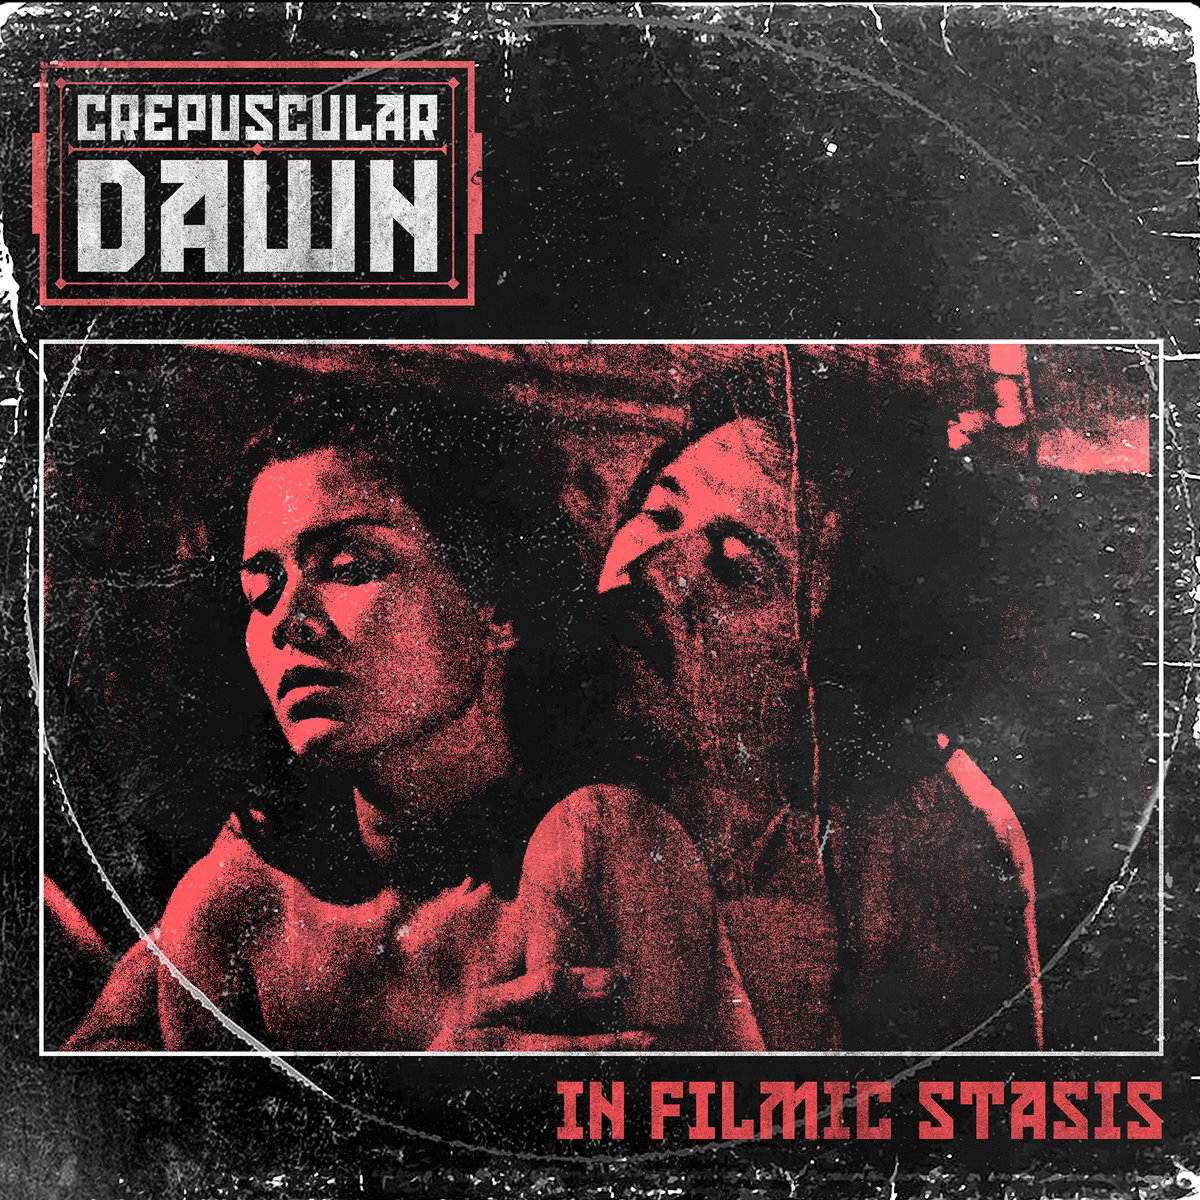 EP REVIEW: CREPUSCULAR DAWN – IN FILMIC STASIS